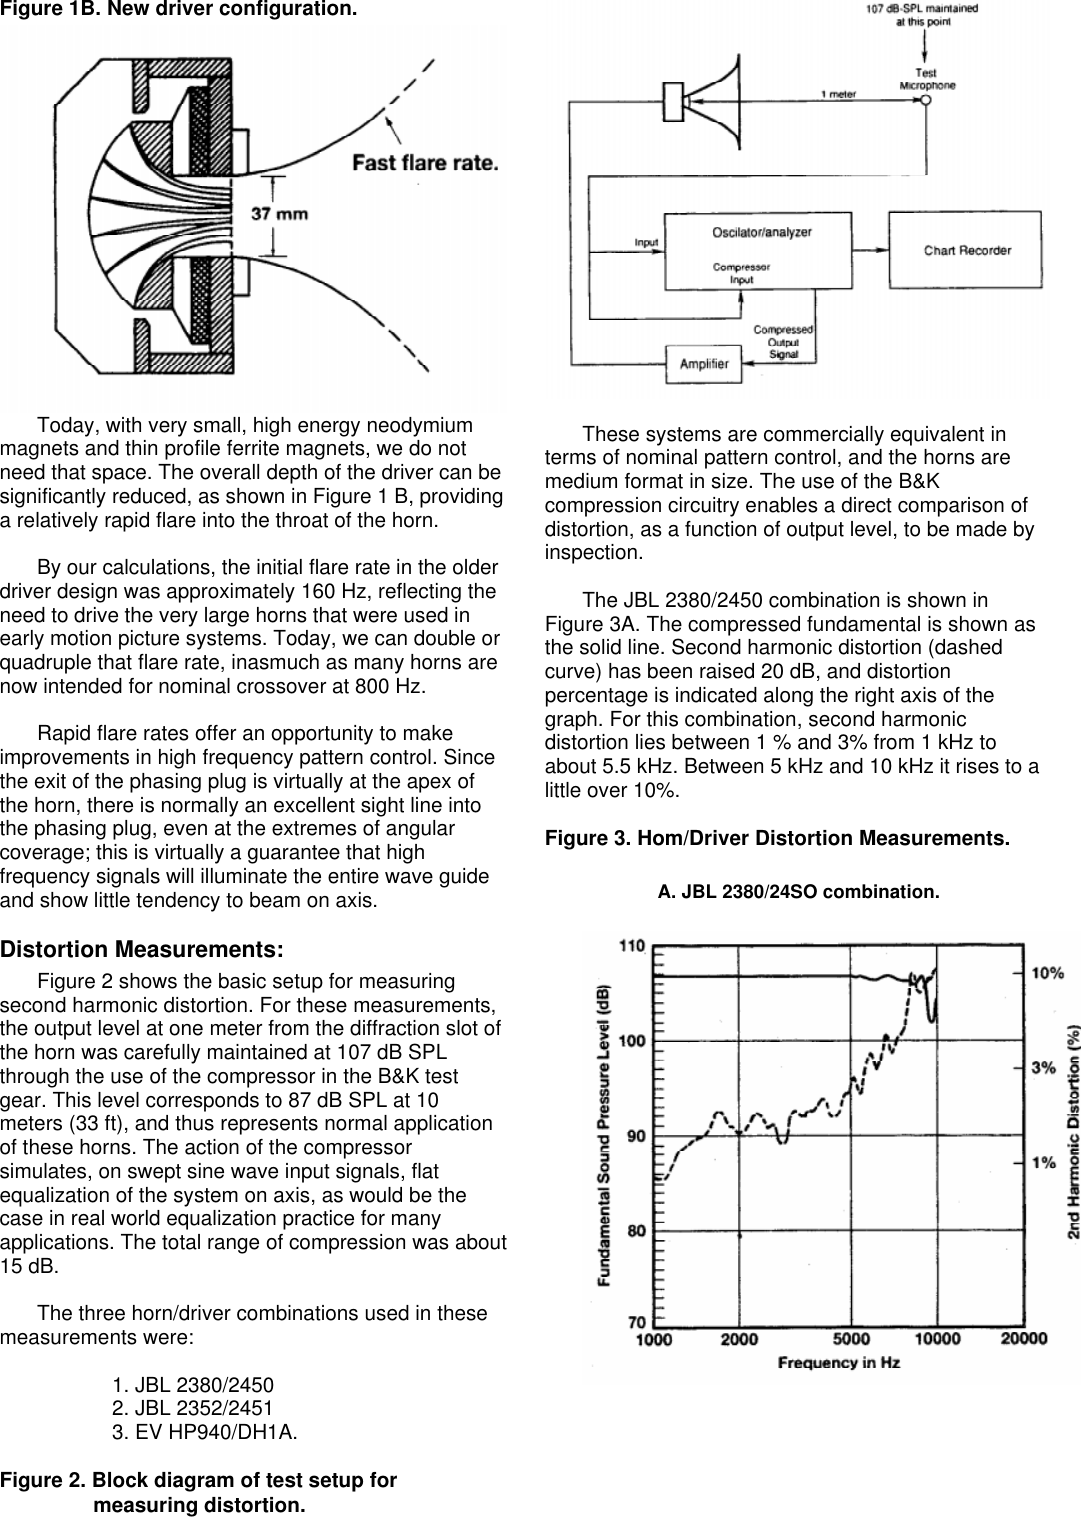 Page 2 of 4 - JBL Technical Note Volume 1 Number 21 Tn V1n21